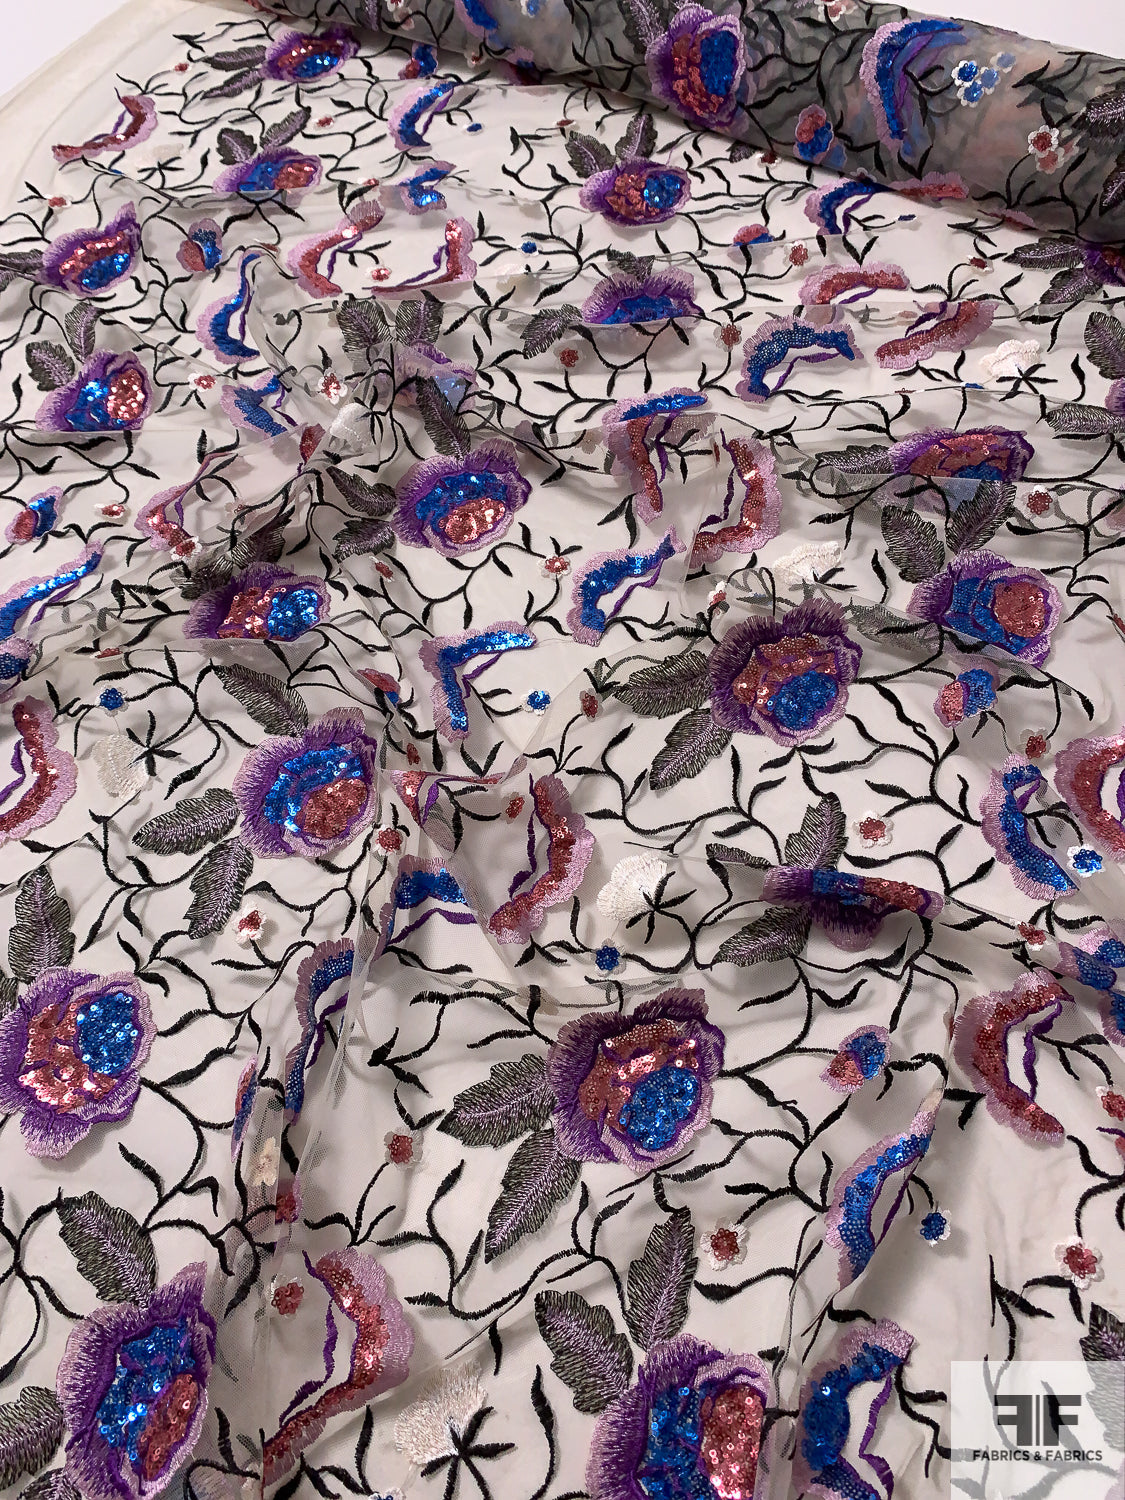 Floral Embroidered Champagne-Based Fine Netting with Sequins Enhancements - Purples / Pinks / Blue / Black